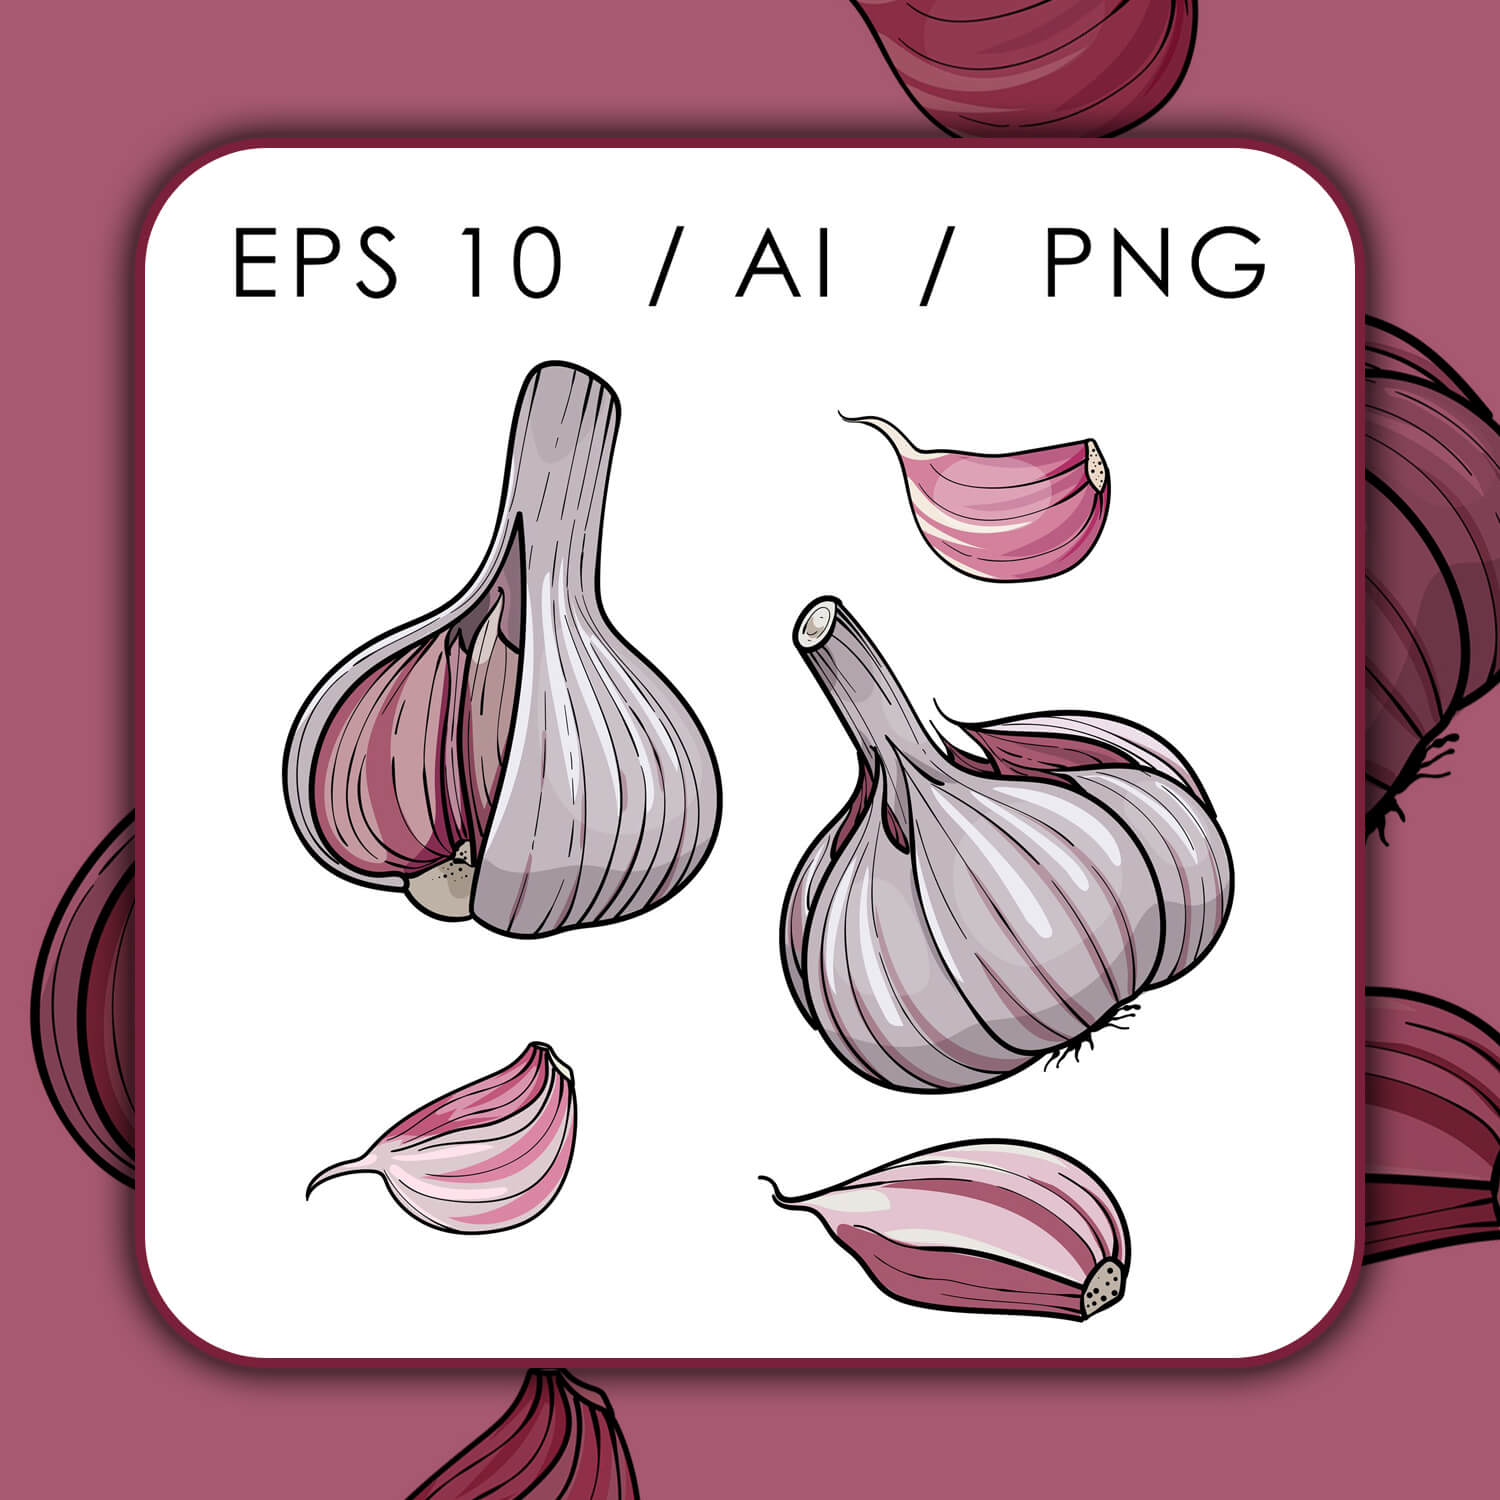 A large slide with a pink background and an image of garlic.